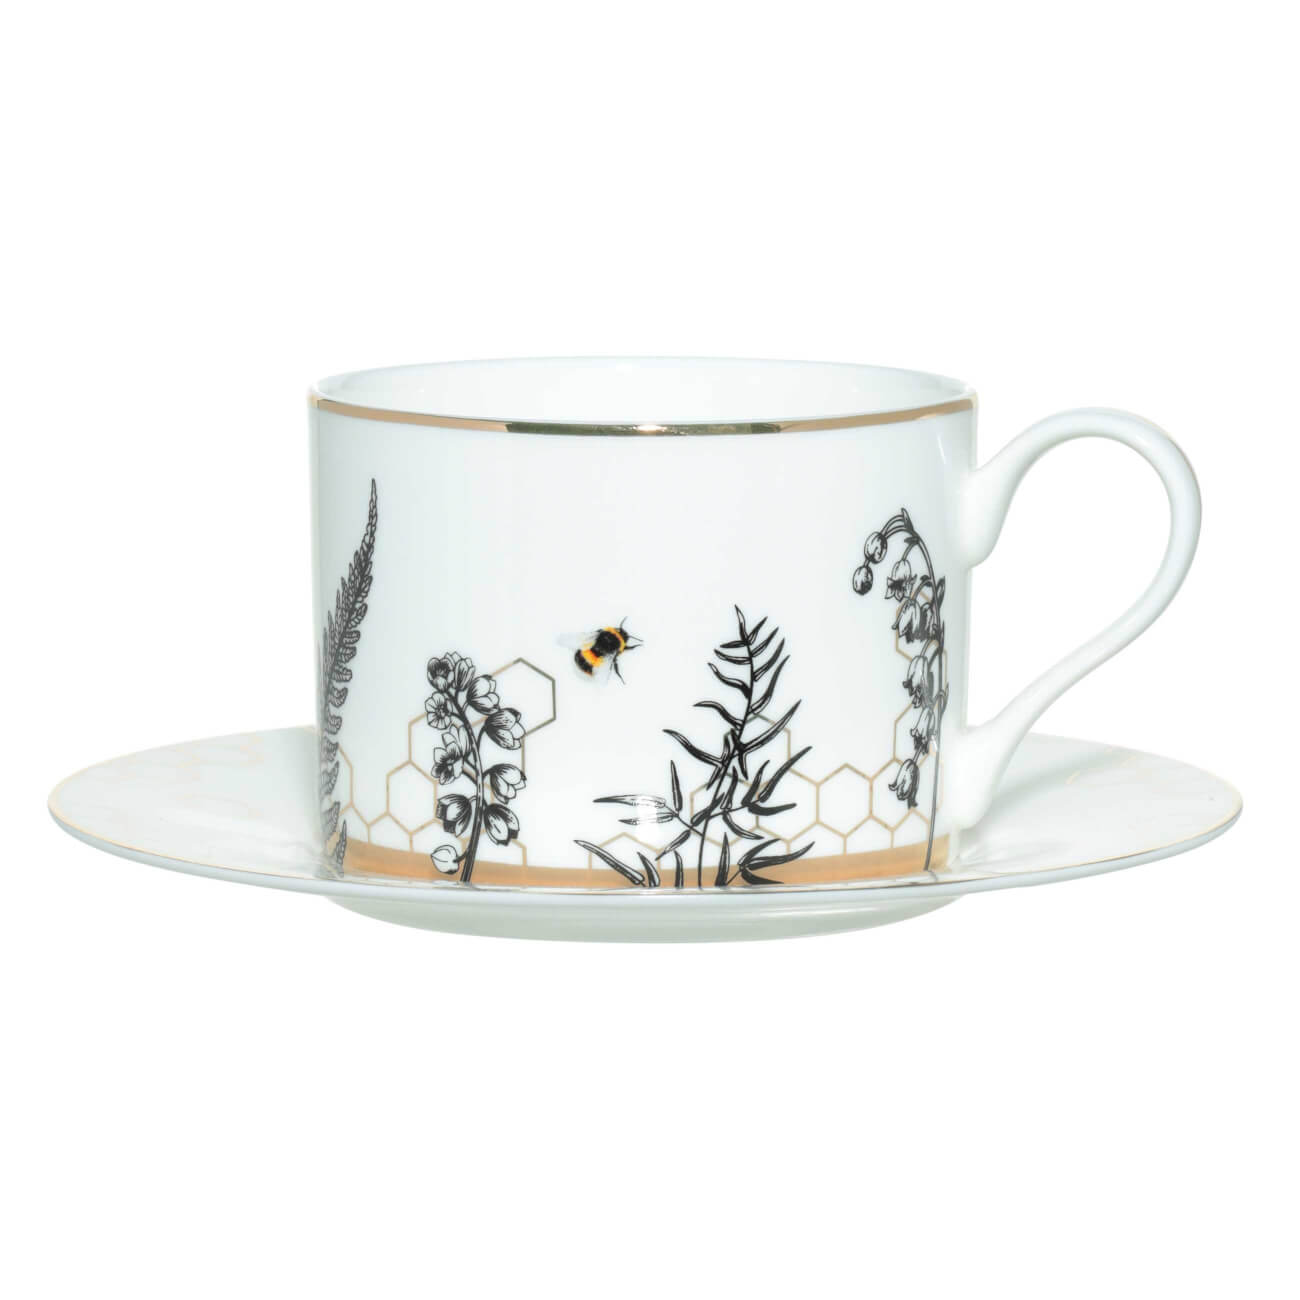 Tea pair, 1 pers, 2 items, 350 ml, porcelain F, white-gold, Bees and honeycombs, Honey изображение № 1